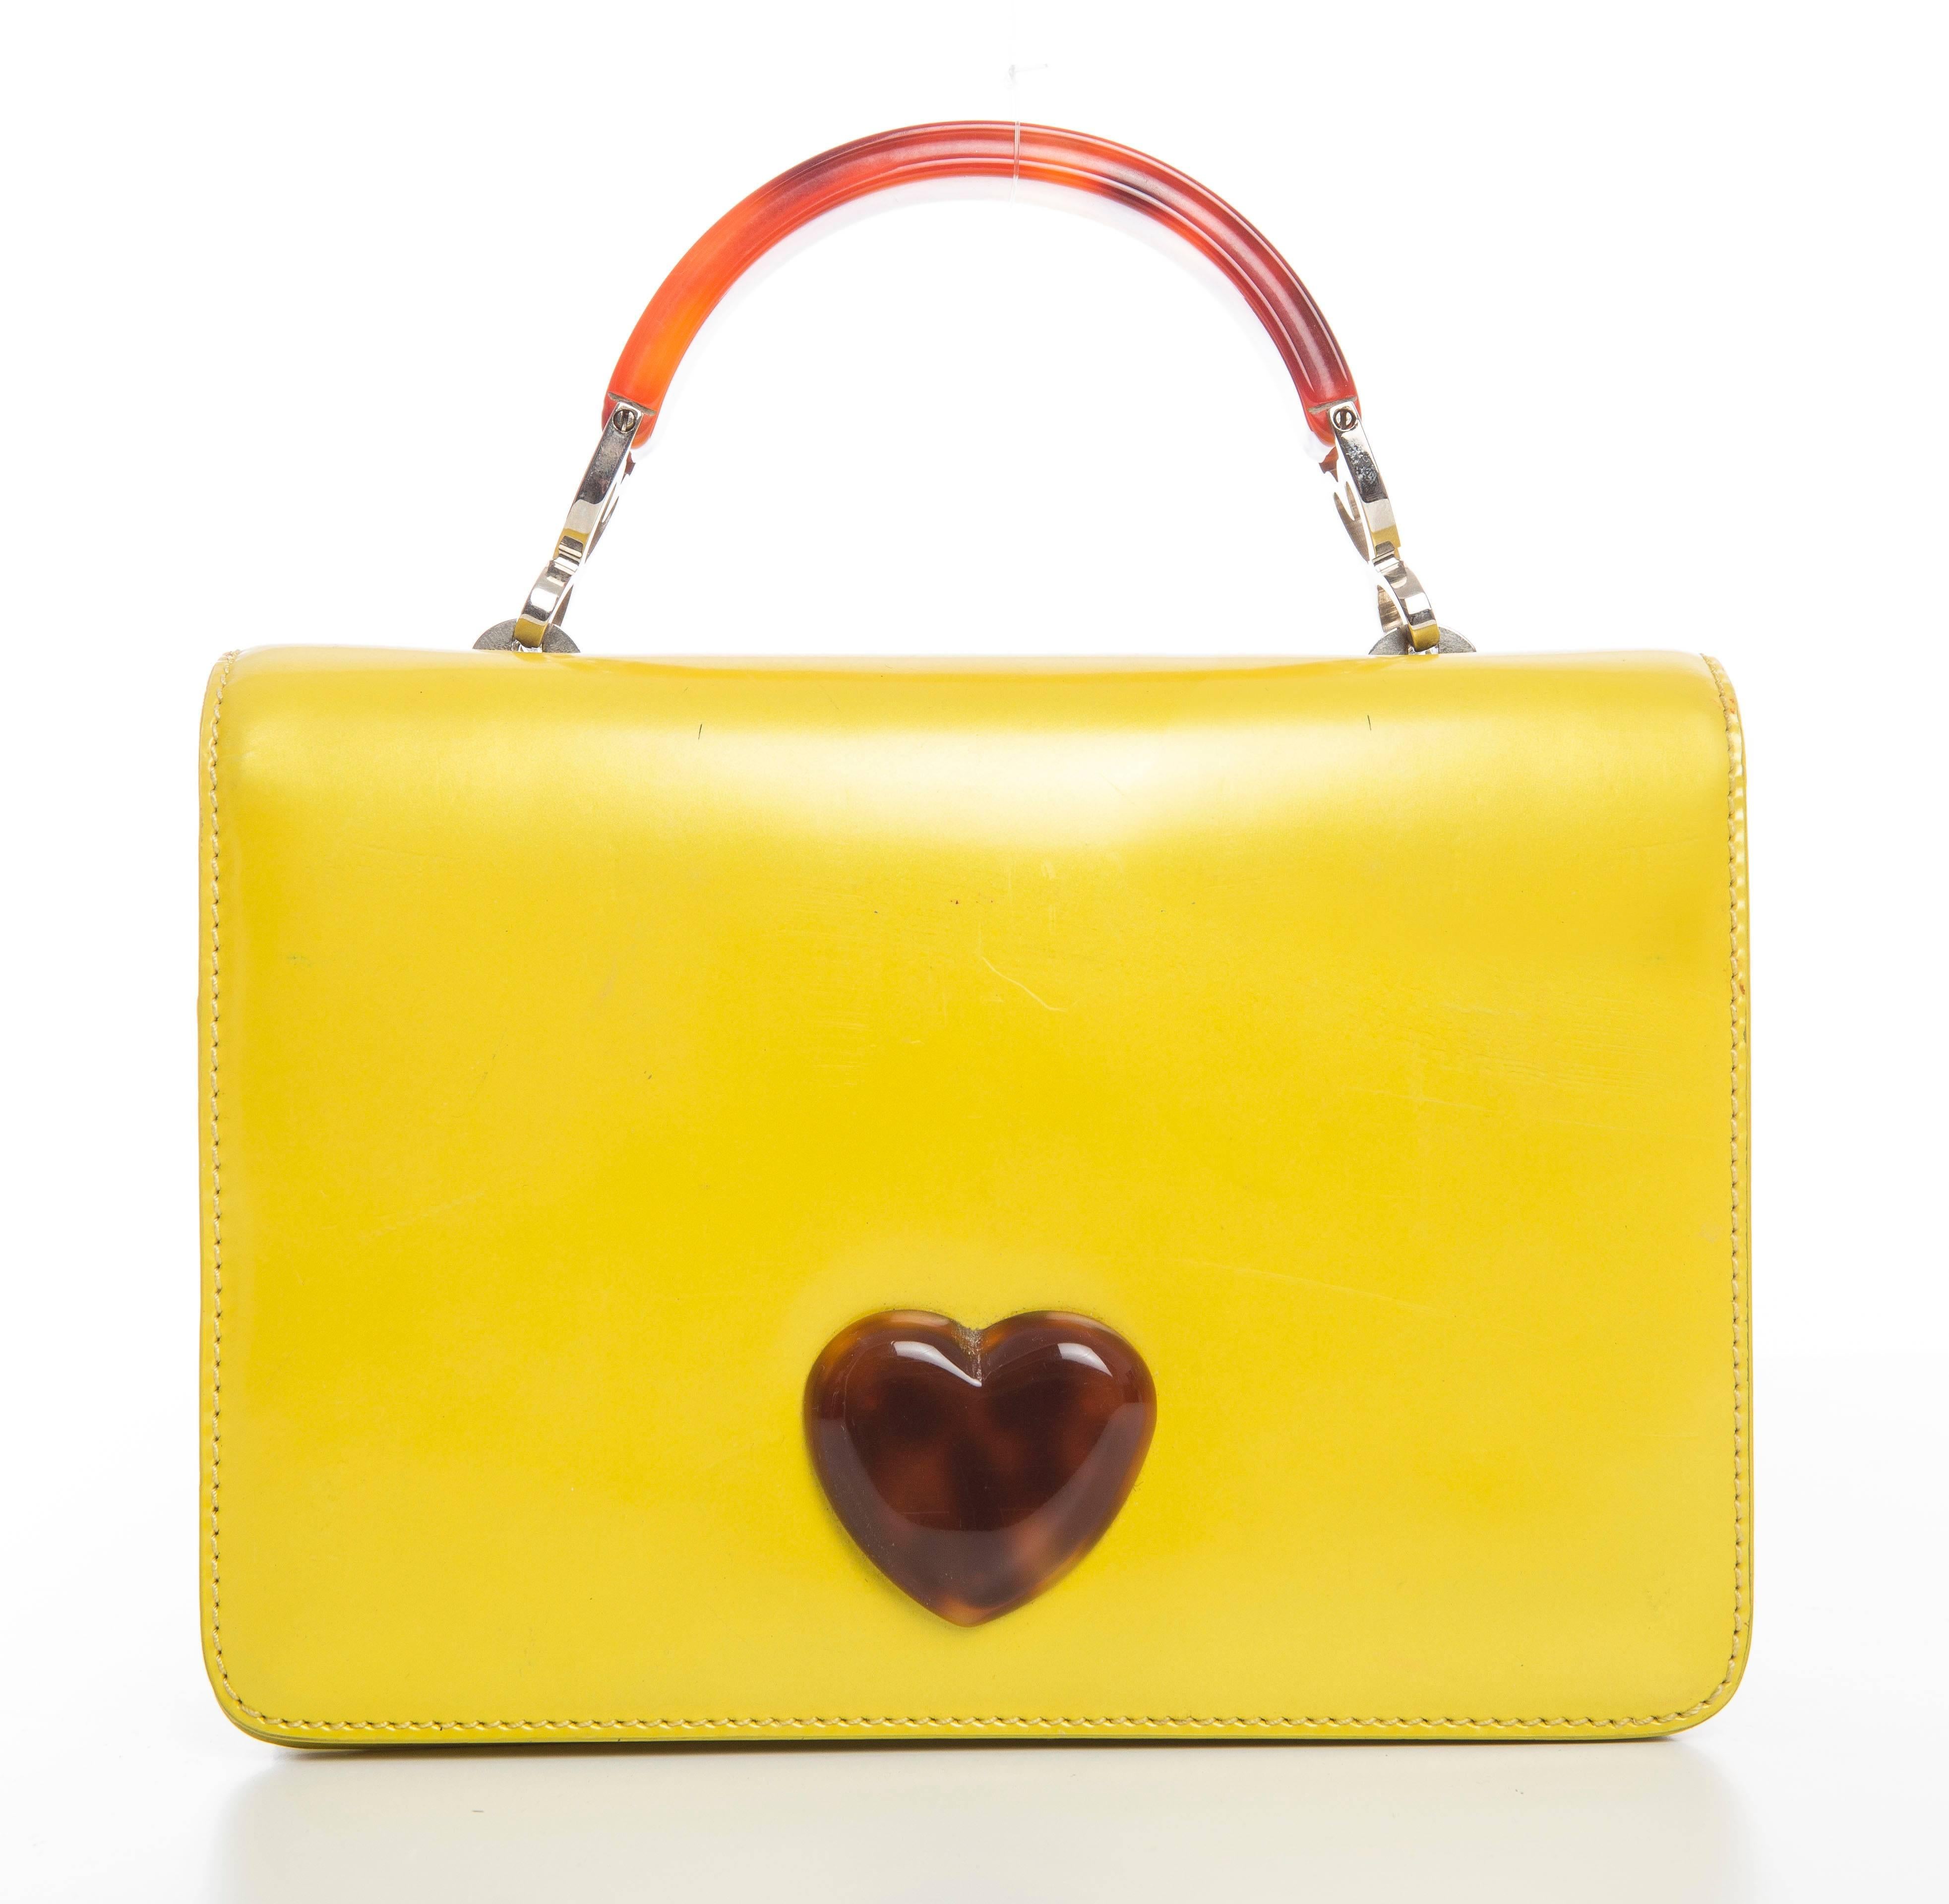 Moschino, circa 1990's yellow leather handbag with embellished heart and one interior pocket.